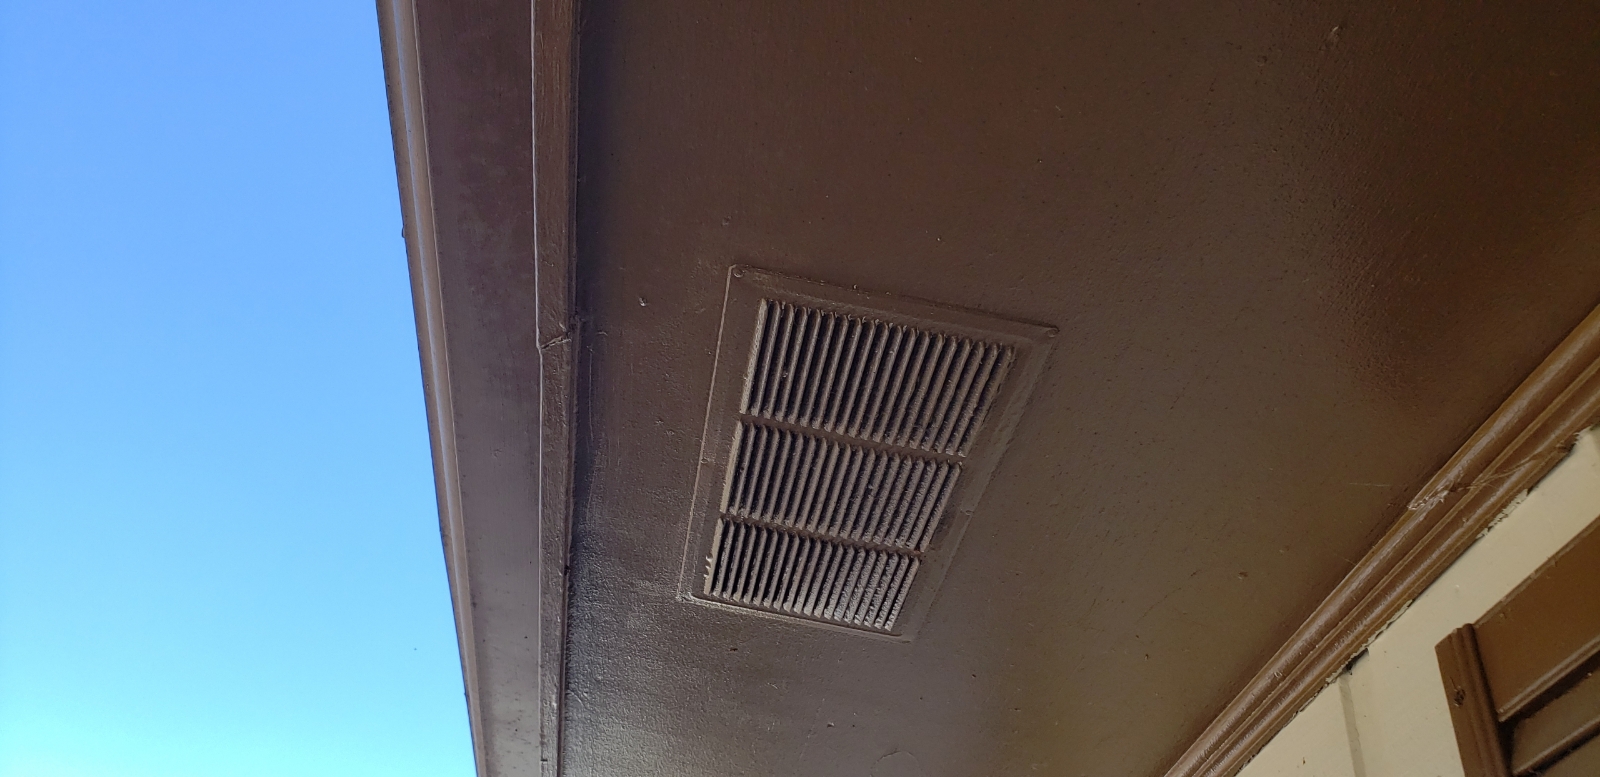 Soffit Vent in Attic